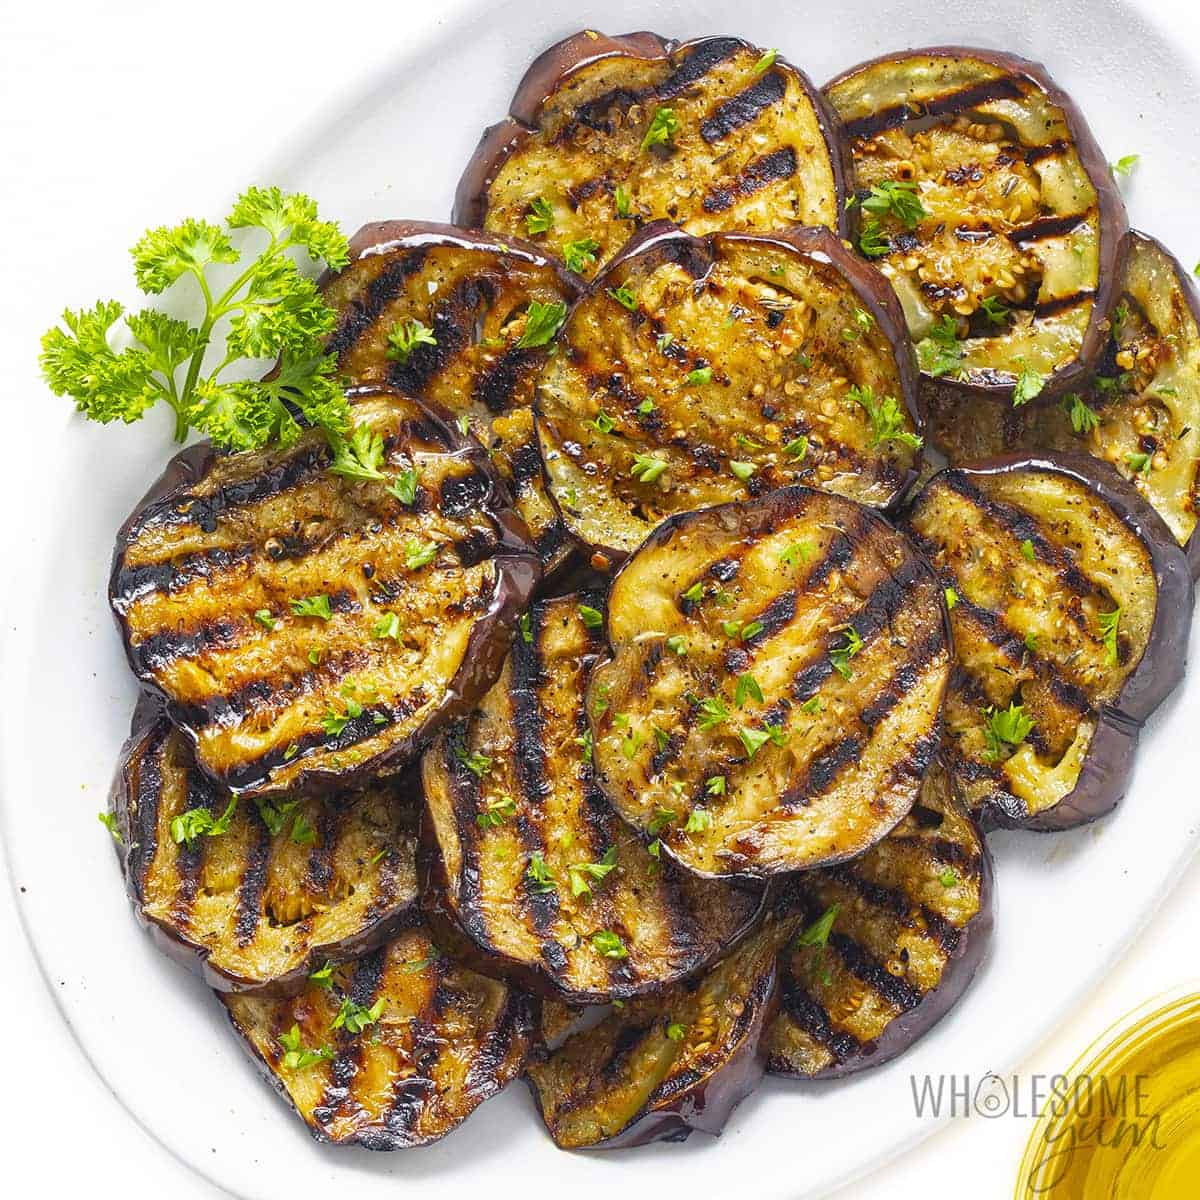 Grilled Eggplant Recipe (Quick & Easy!) from https://www.wholesomeyum.com/